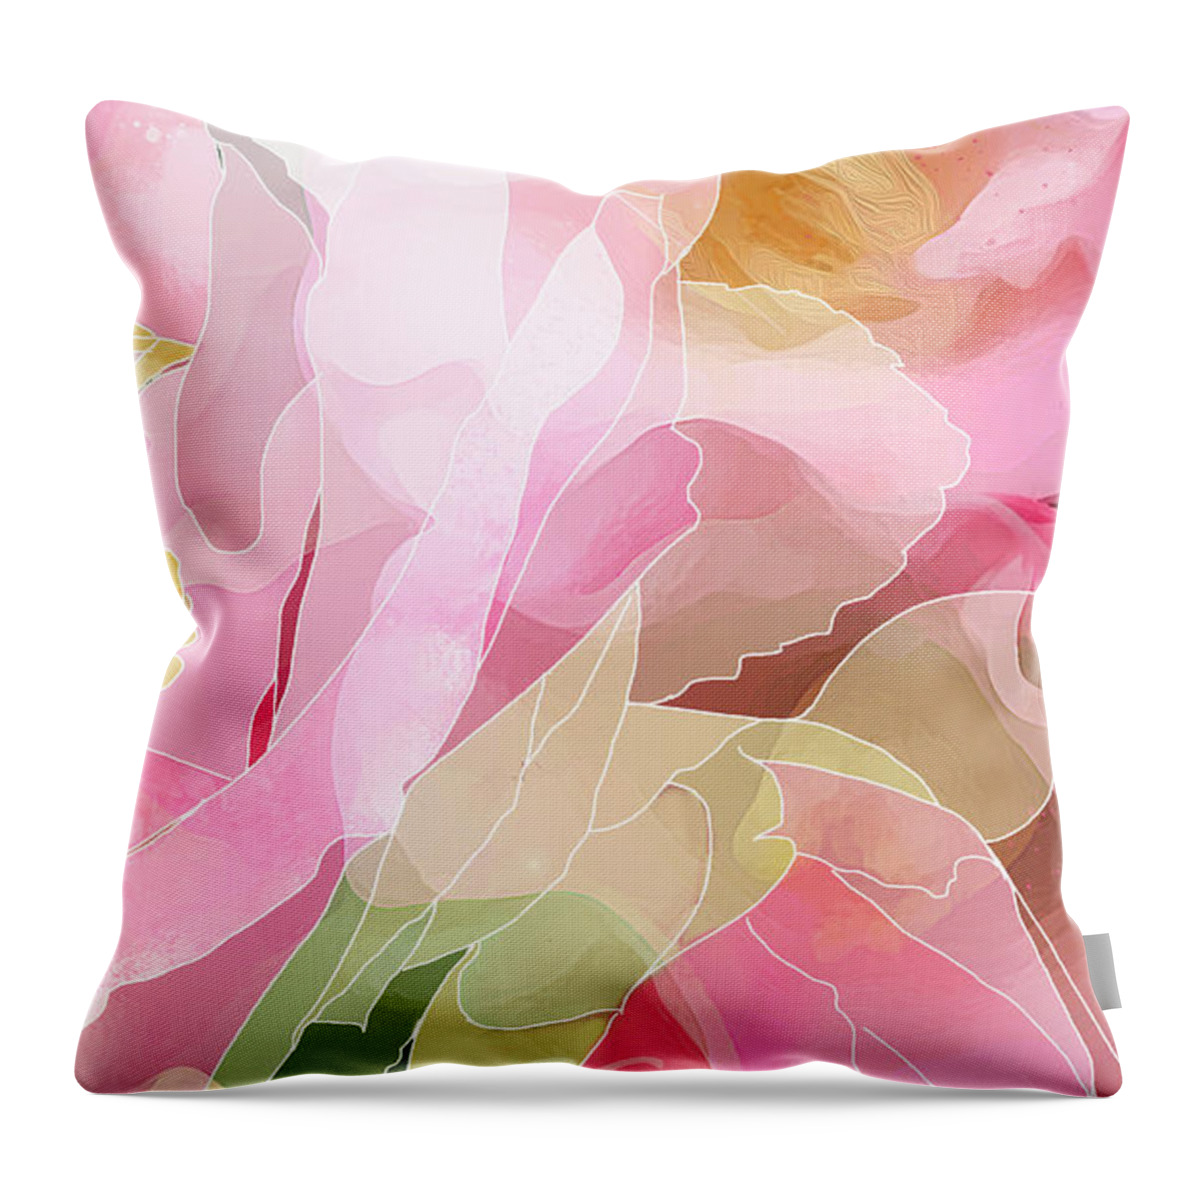 Floral Throw Pillow featuring the digital art Camille by Gina Harrison